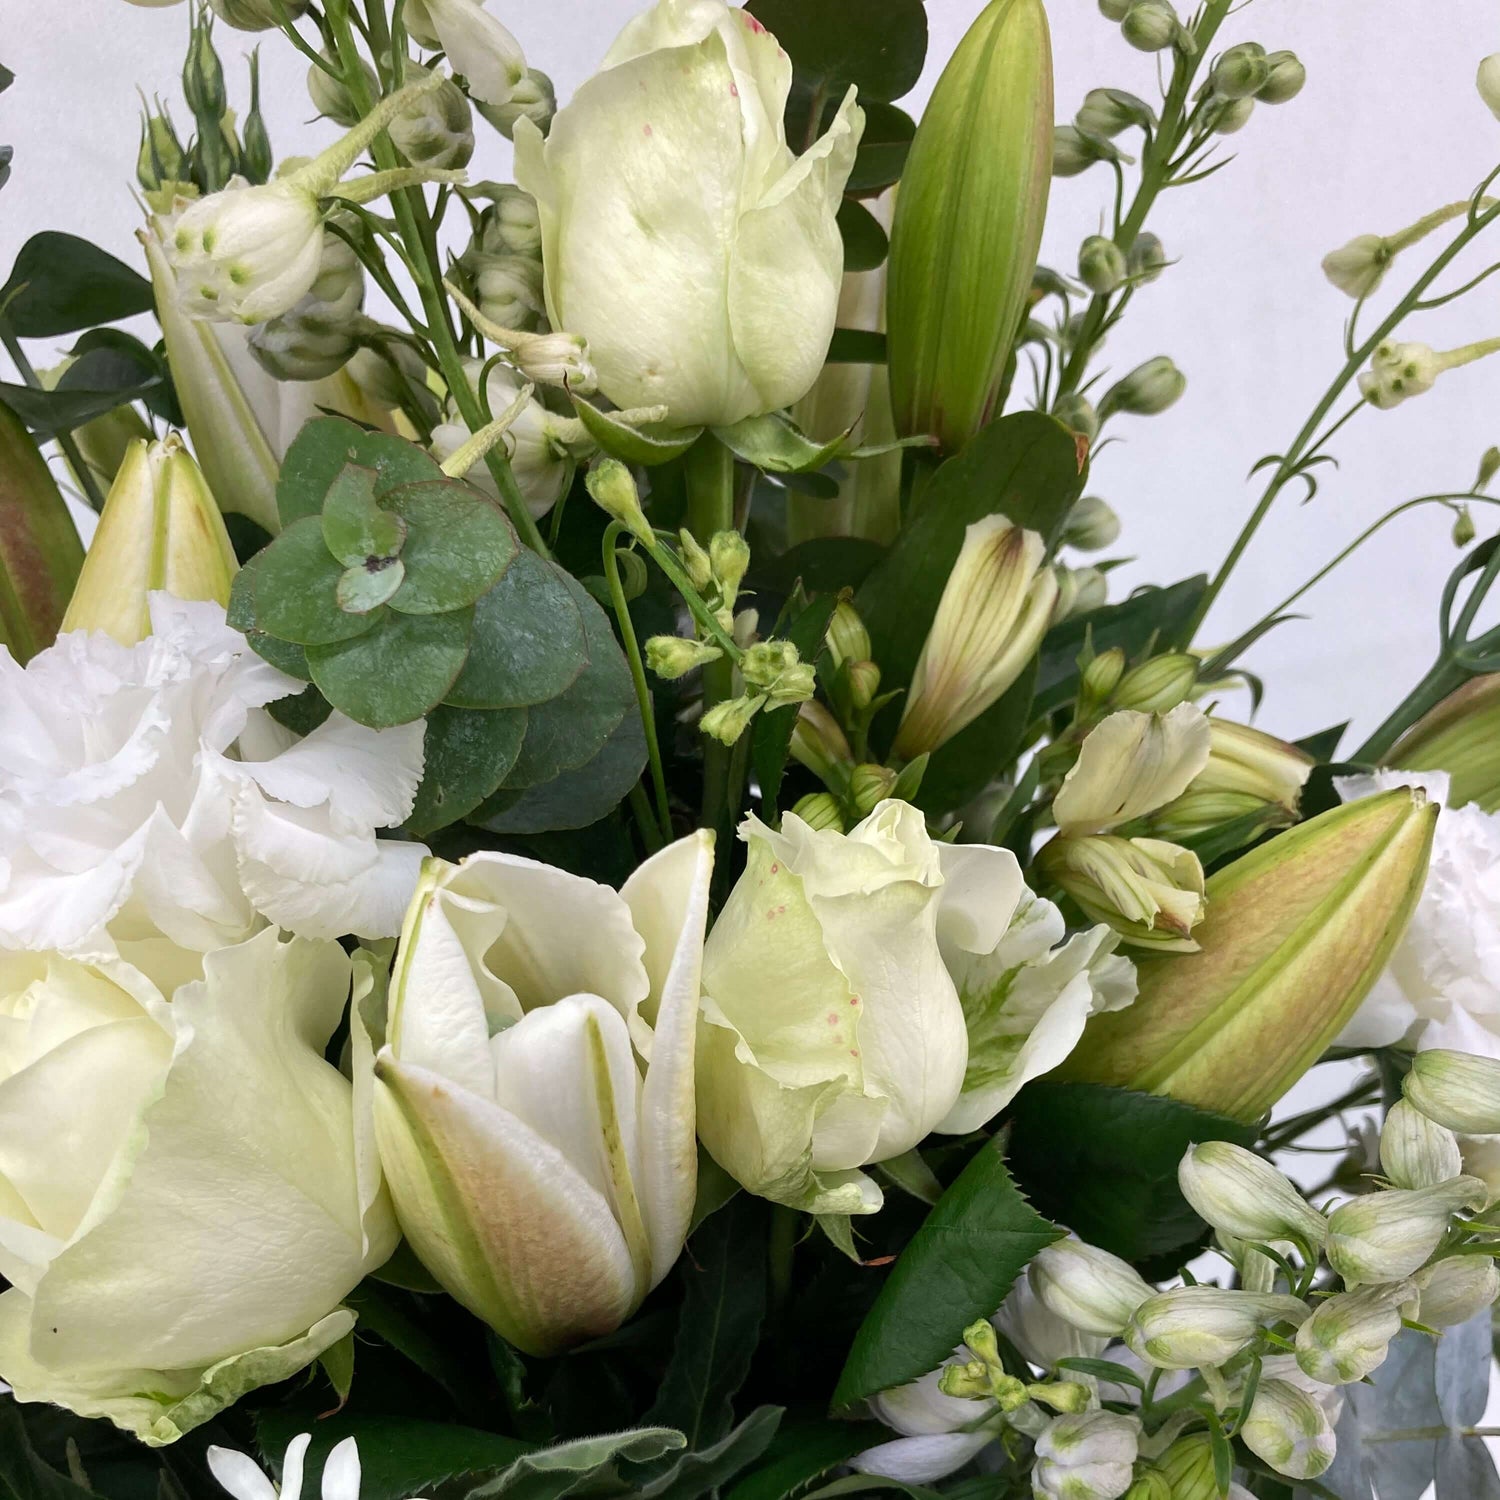 Green and white flowers make the perfect corporate gift.